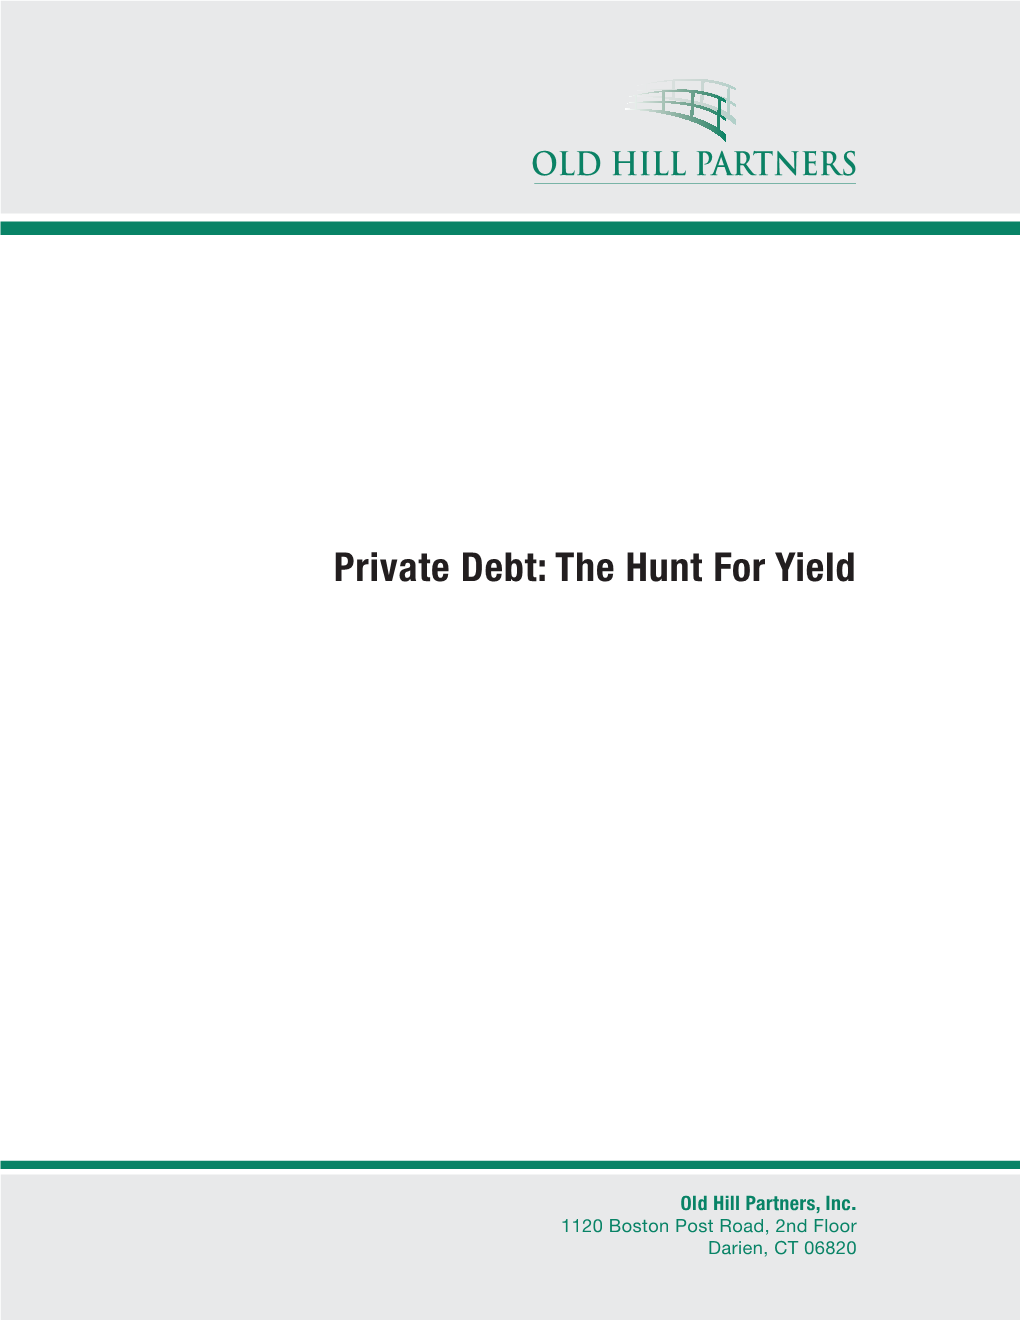 Private Debt: the Hunt for Yield